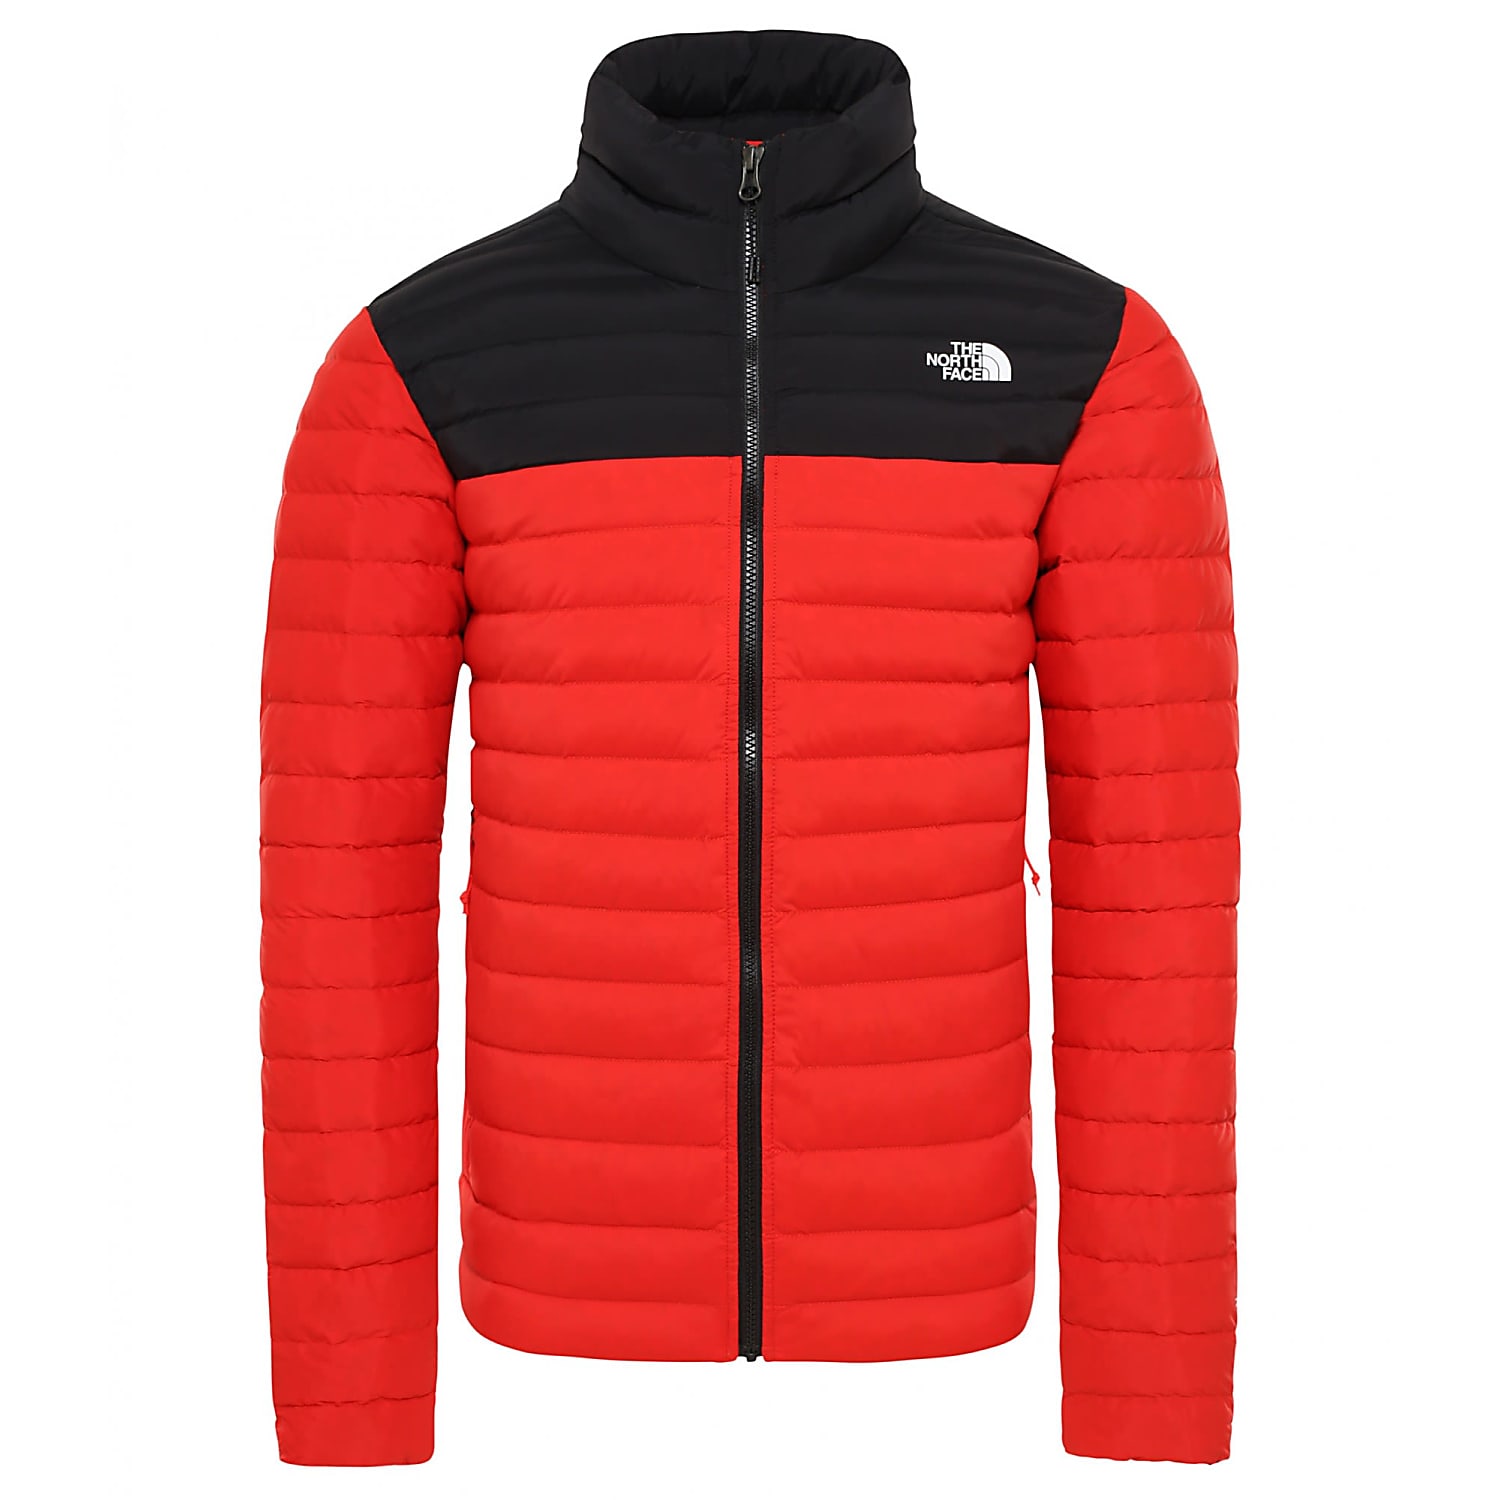 north face black jacket with red zipper